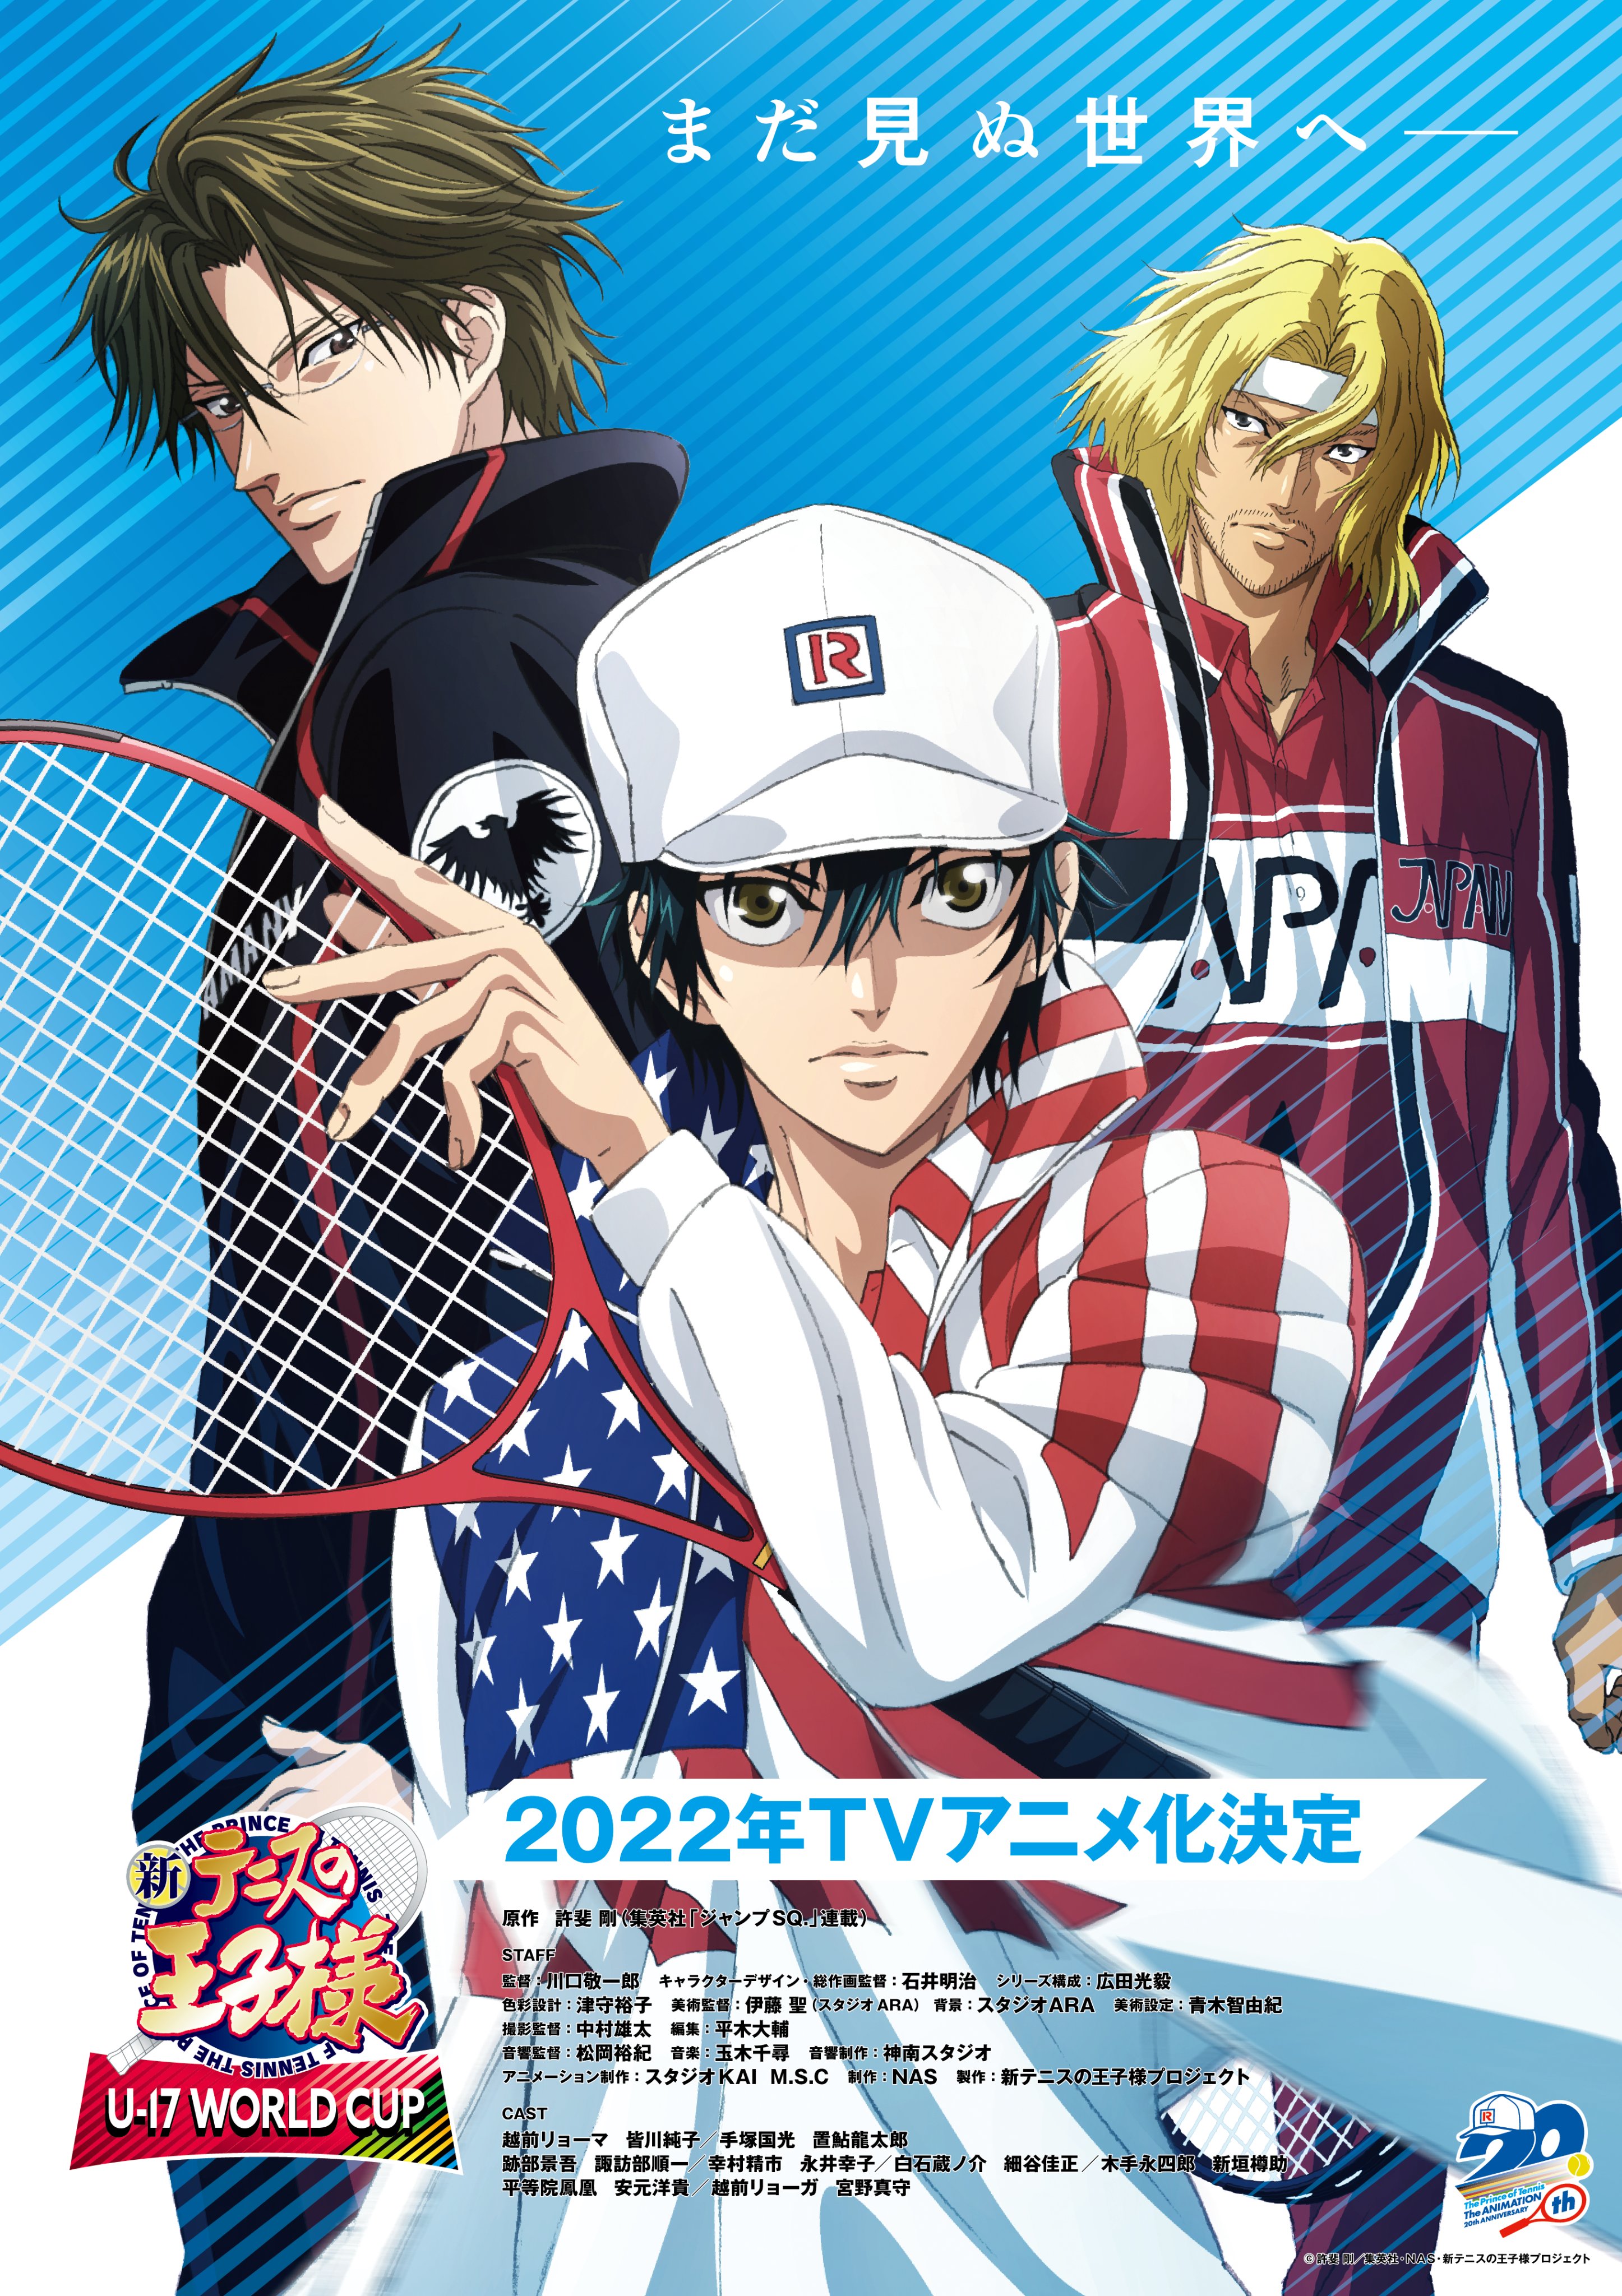 Crunchyroll - The Prince of Tennis II Gets 1st New TV Anime in 10 Years